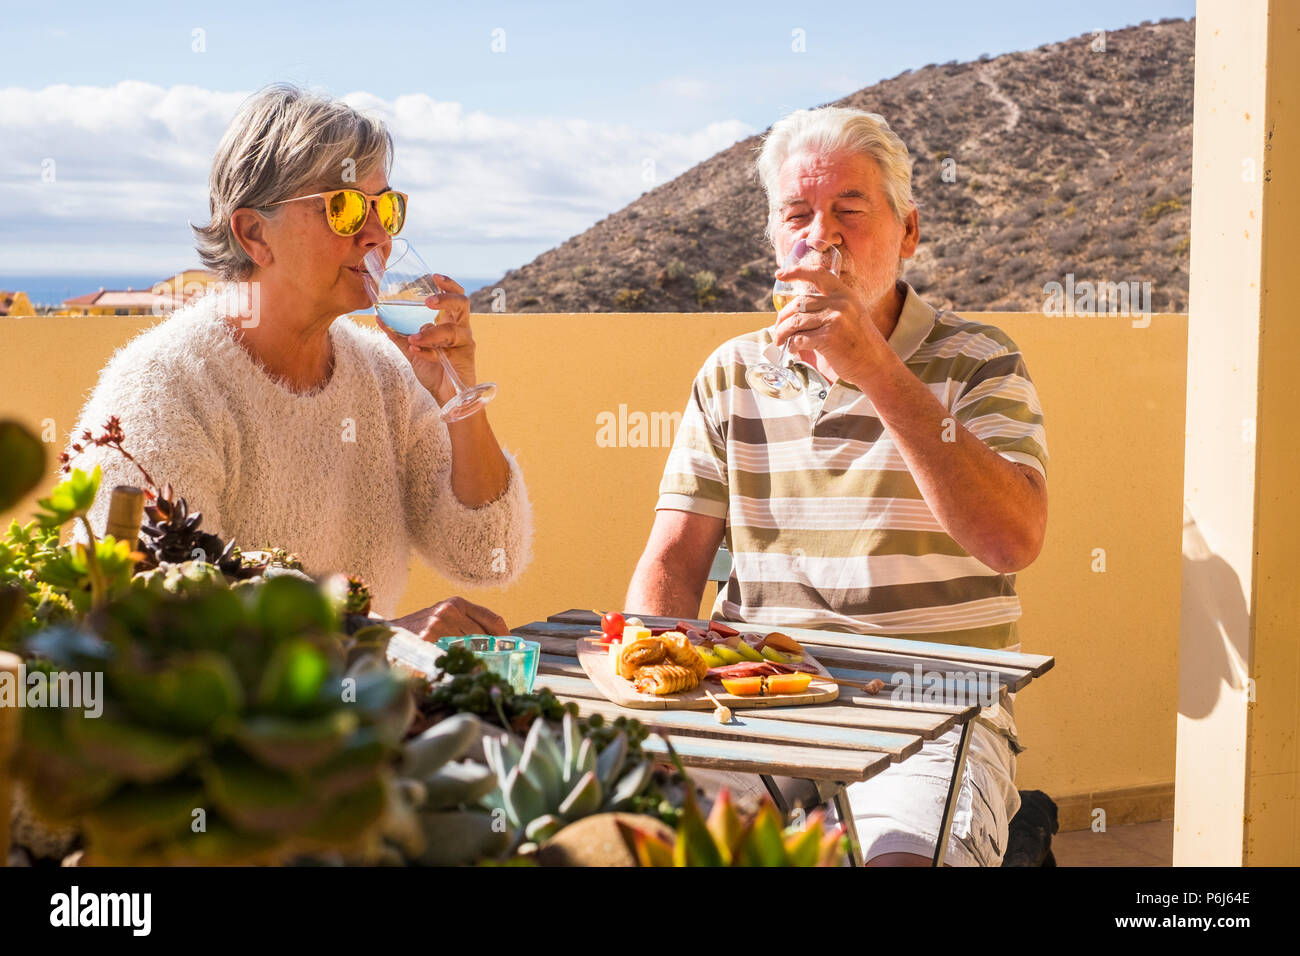 senior adult couple outdoor on the rooftop drinking somw white wine and eating some snacks food salds and fruits. sunny day of vacation or retired lif Stock Photo